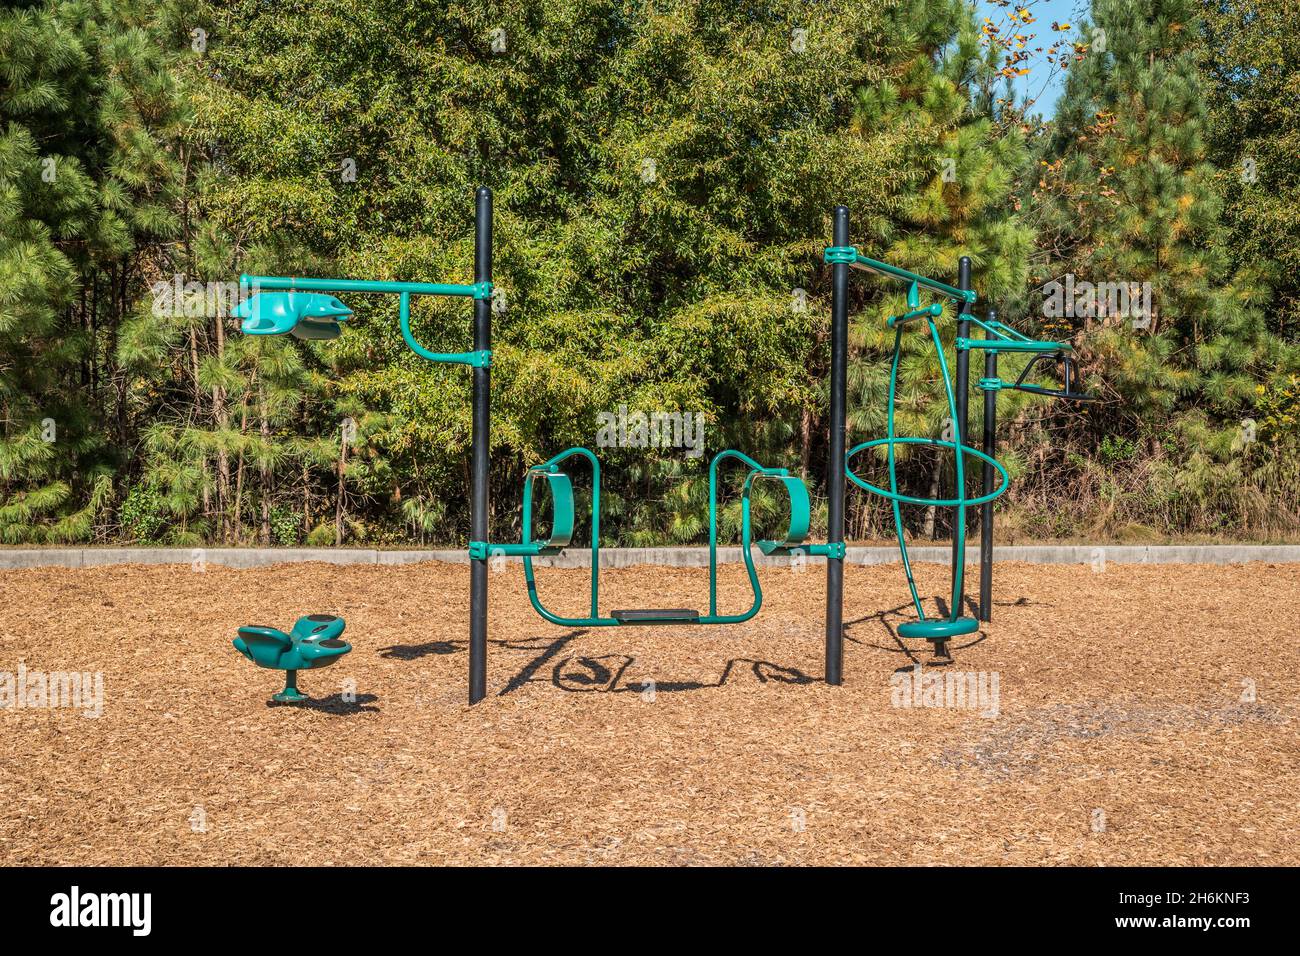 Unique playground equipment that does many different things swings twirls spin at a park outdoors on a sunny day Stock Photo